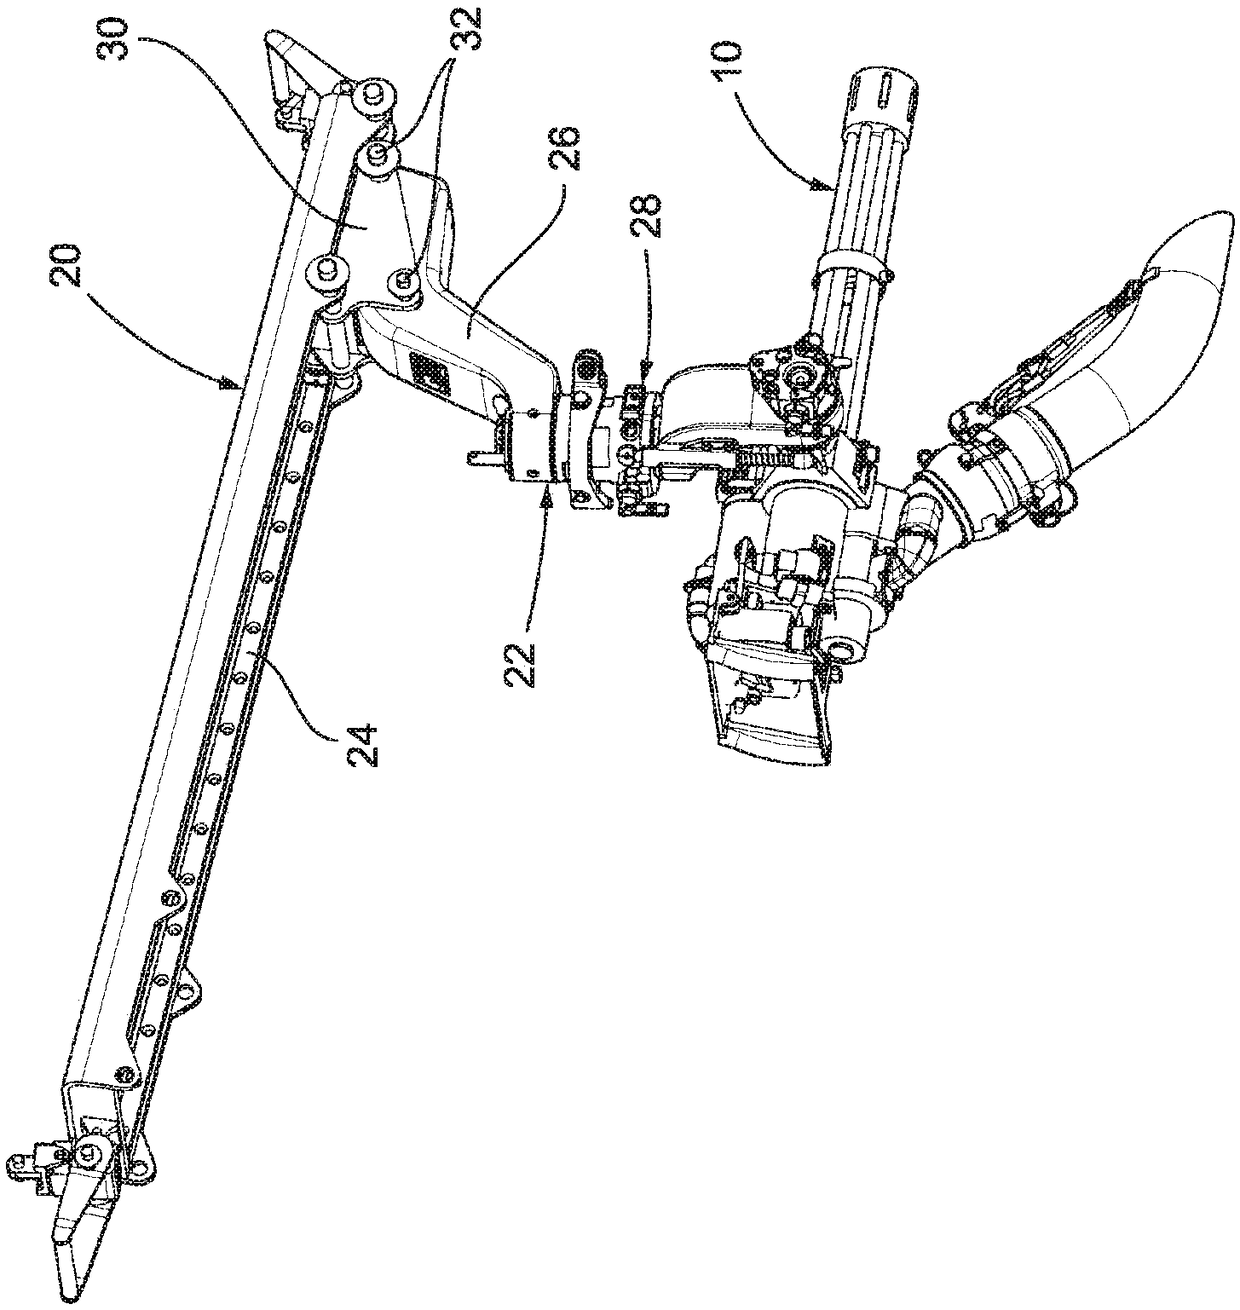 Firearm support system